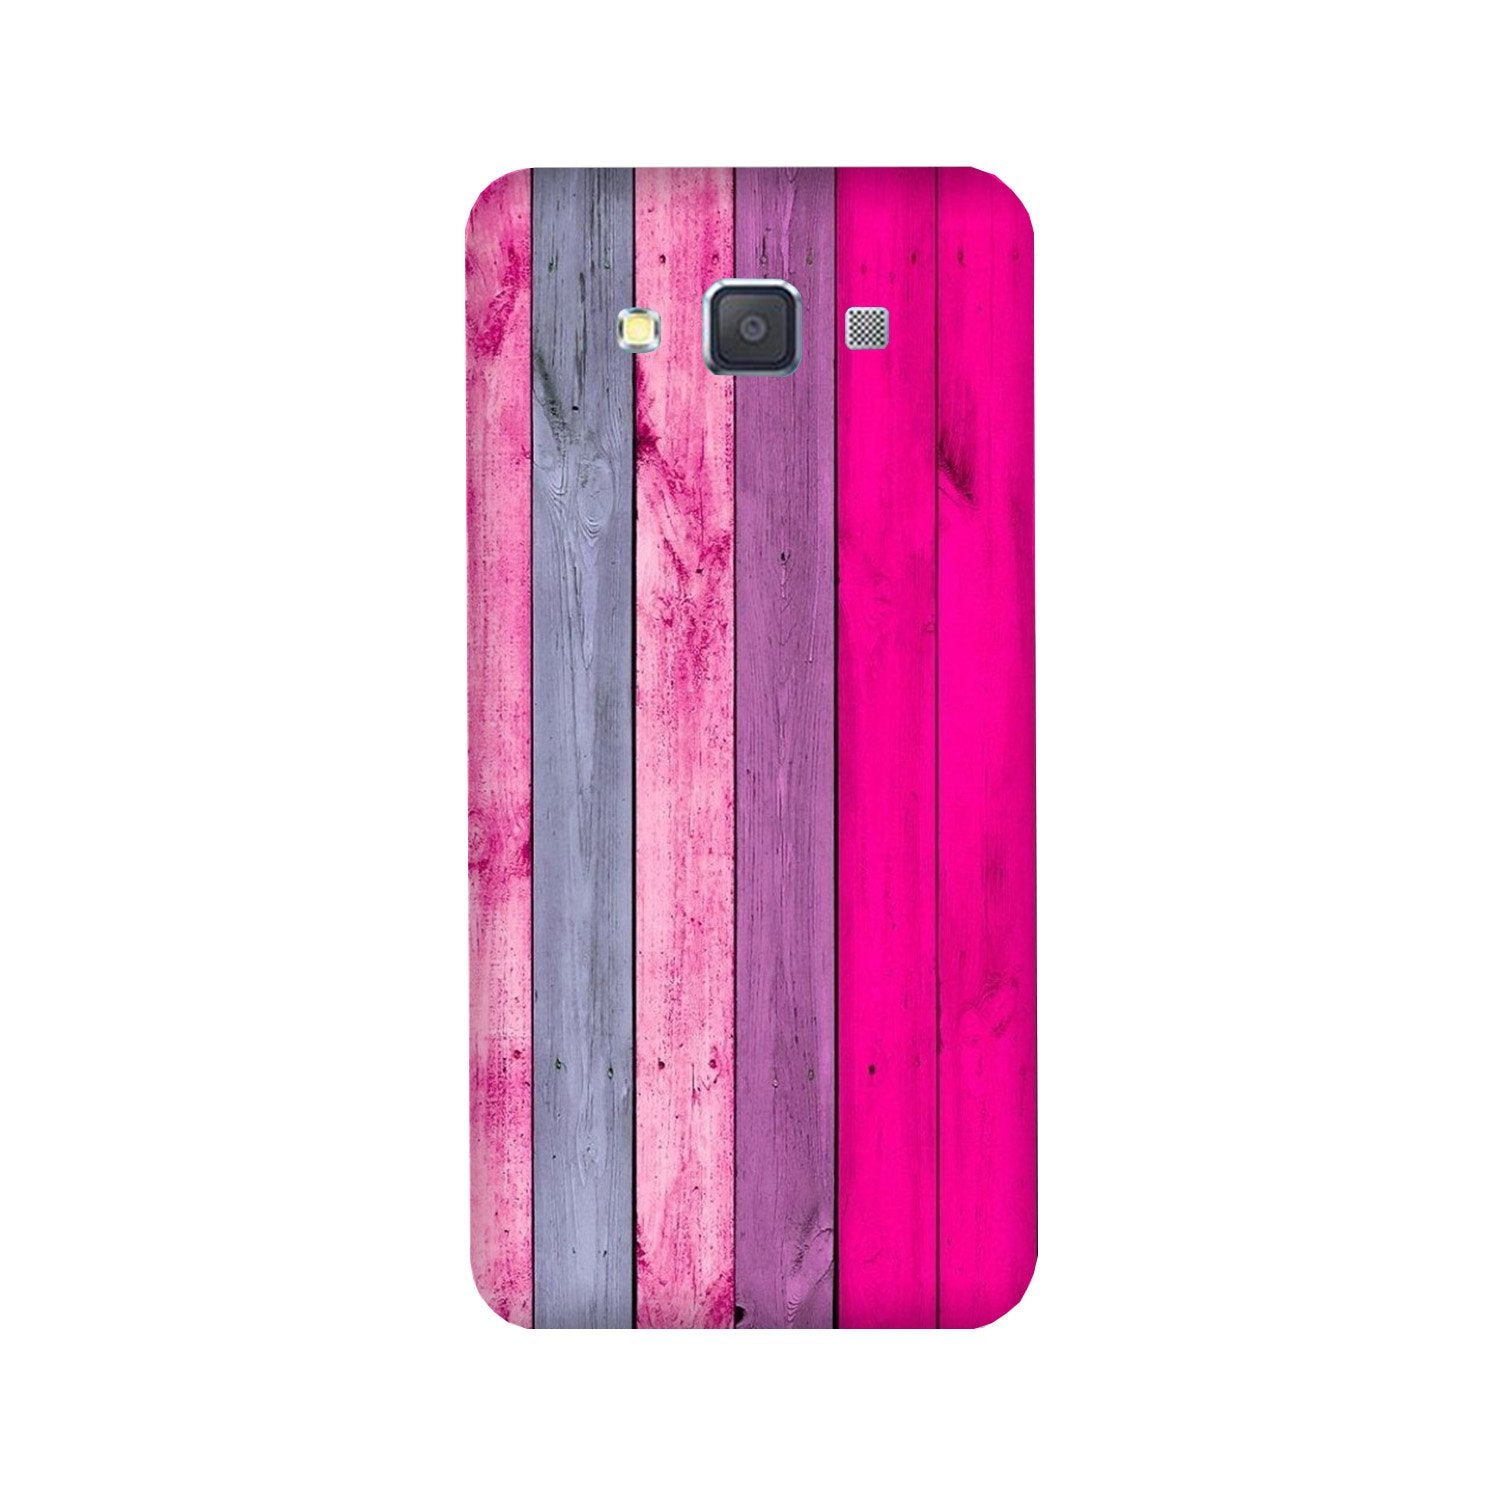 Wooden look Case for Galaxy ON5/ON5 Pro